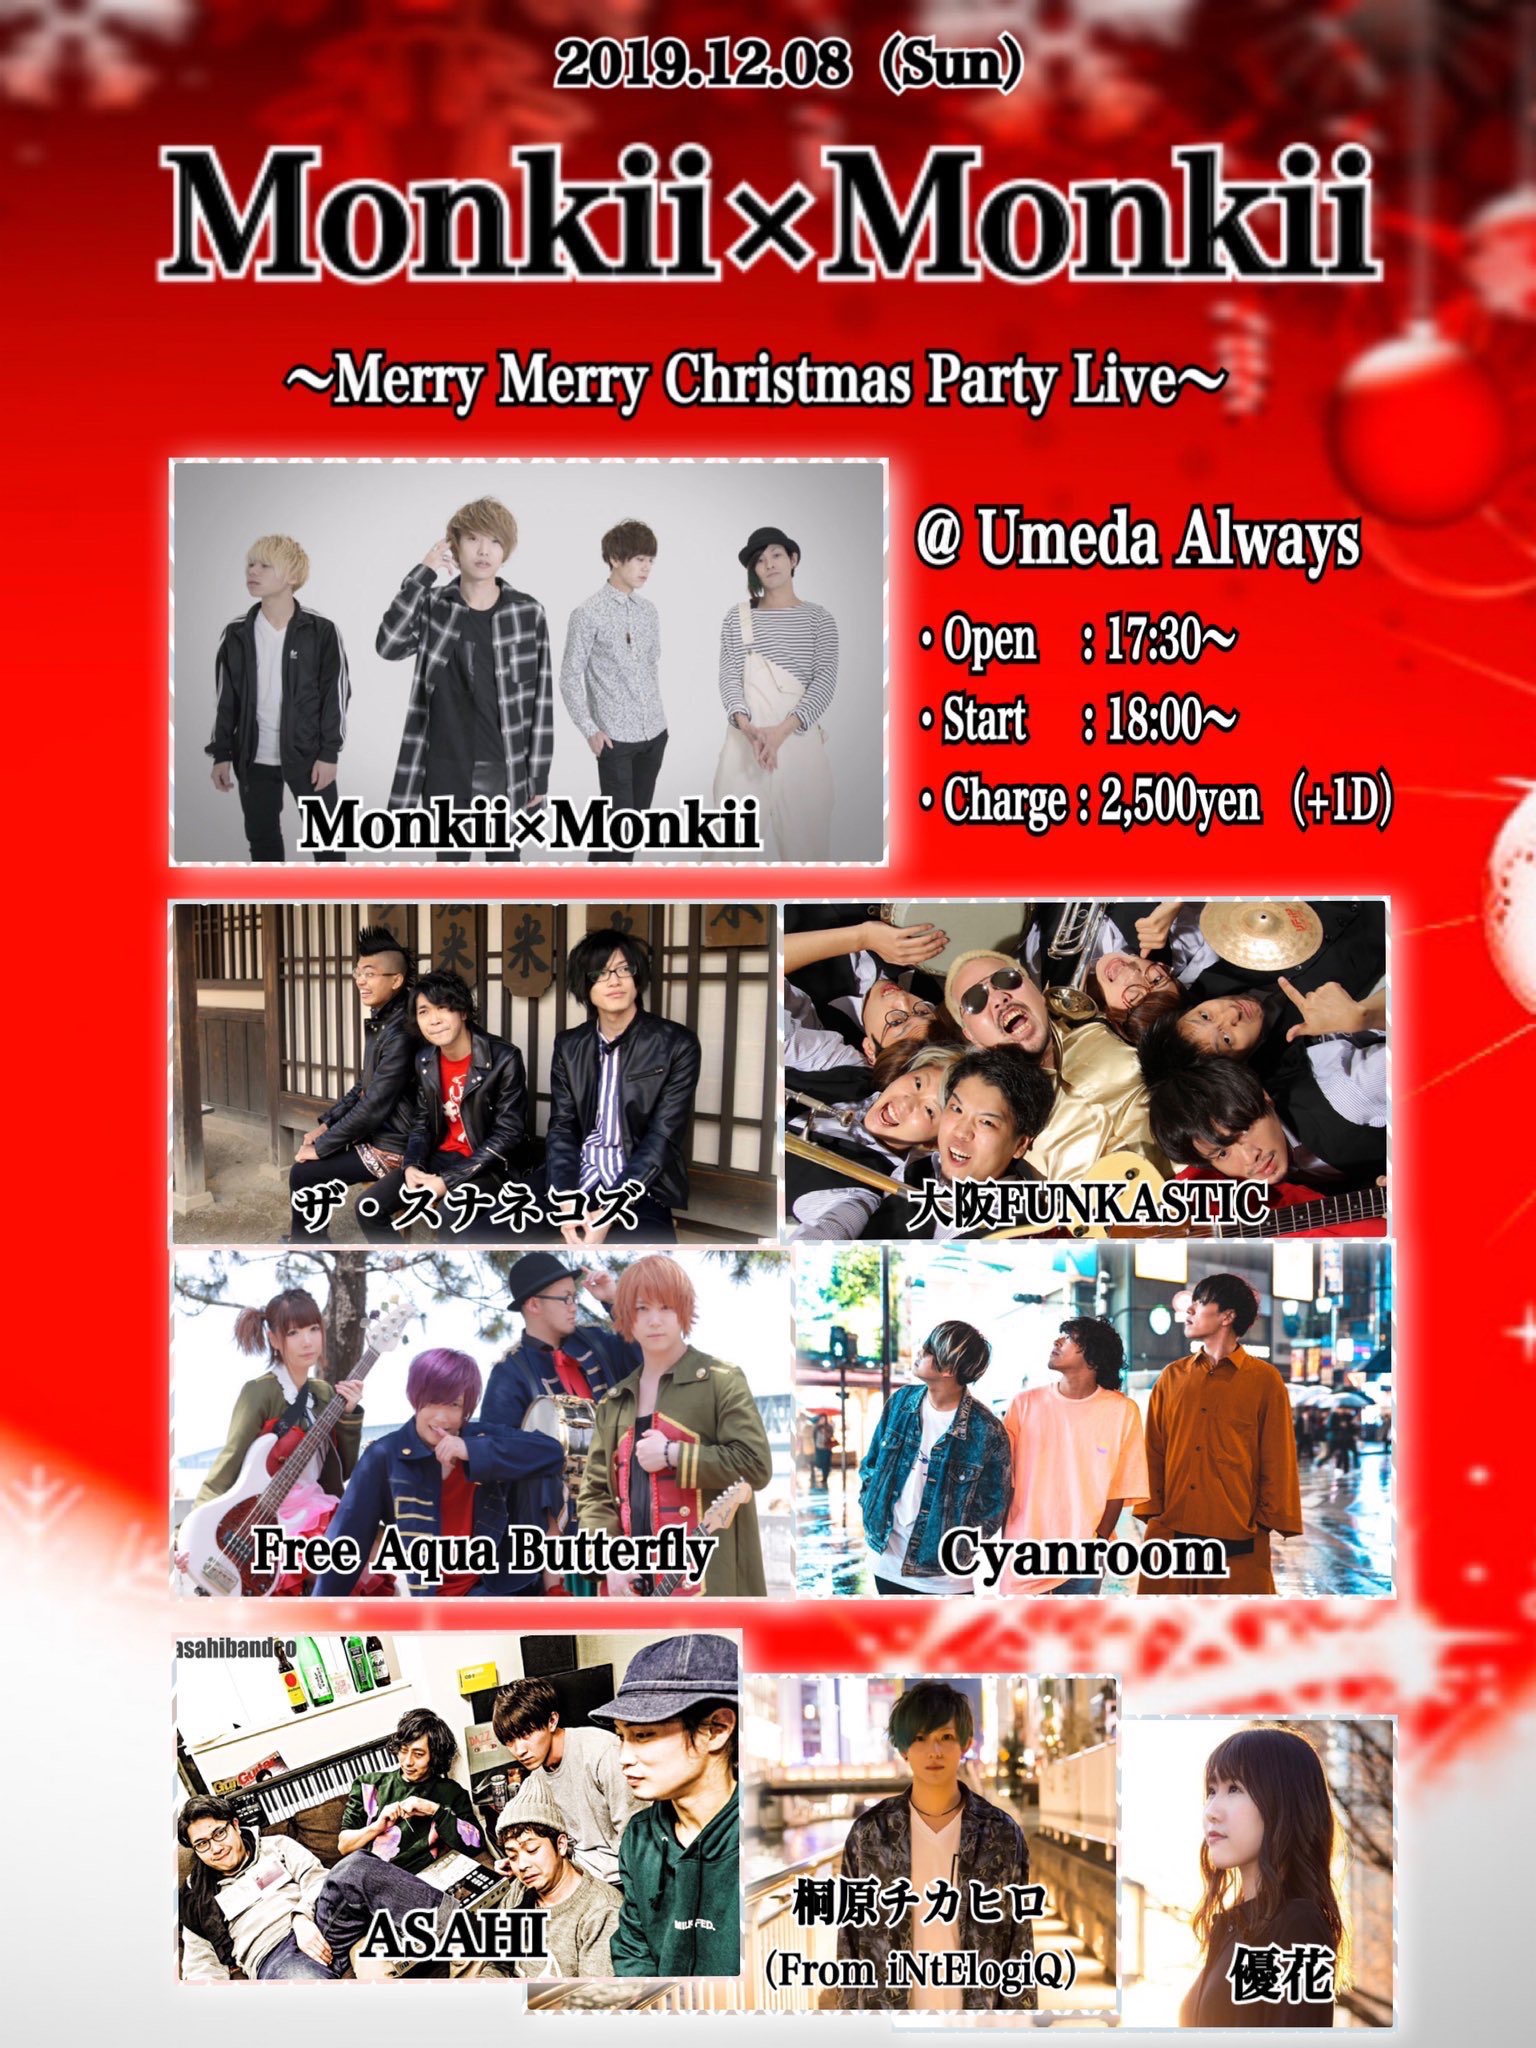 Merry Merry Christmas Party Live